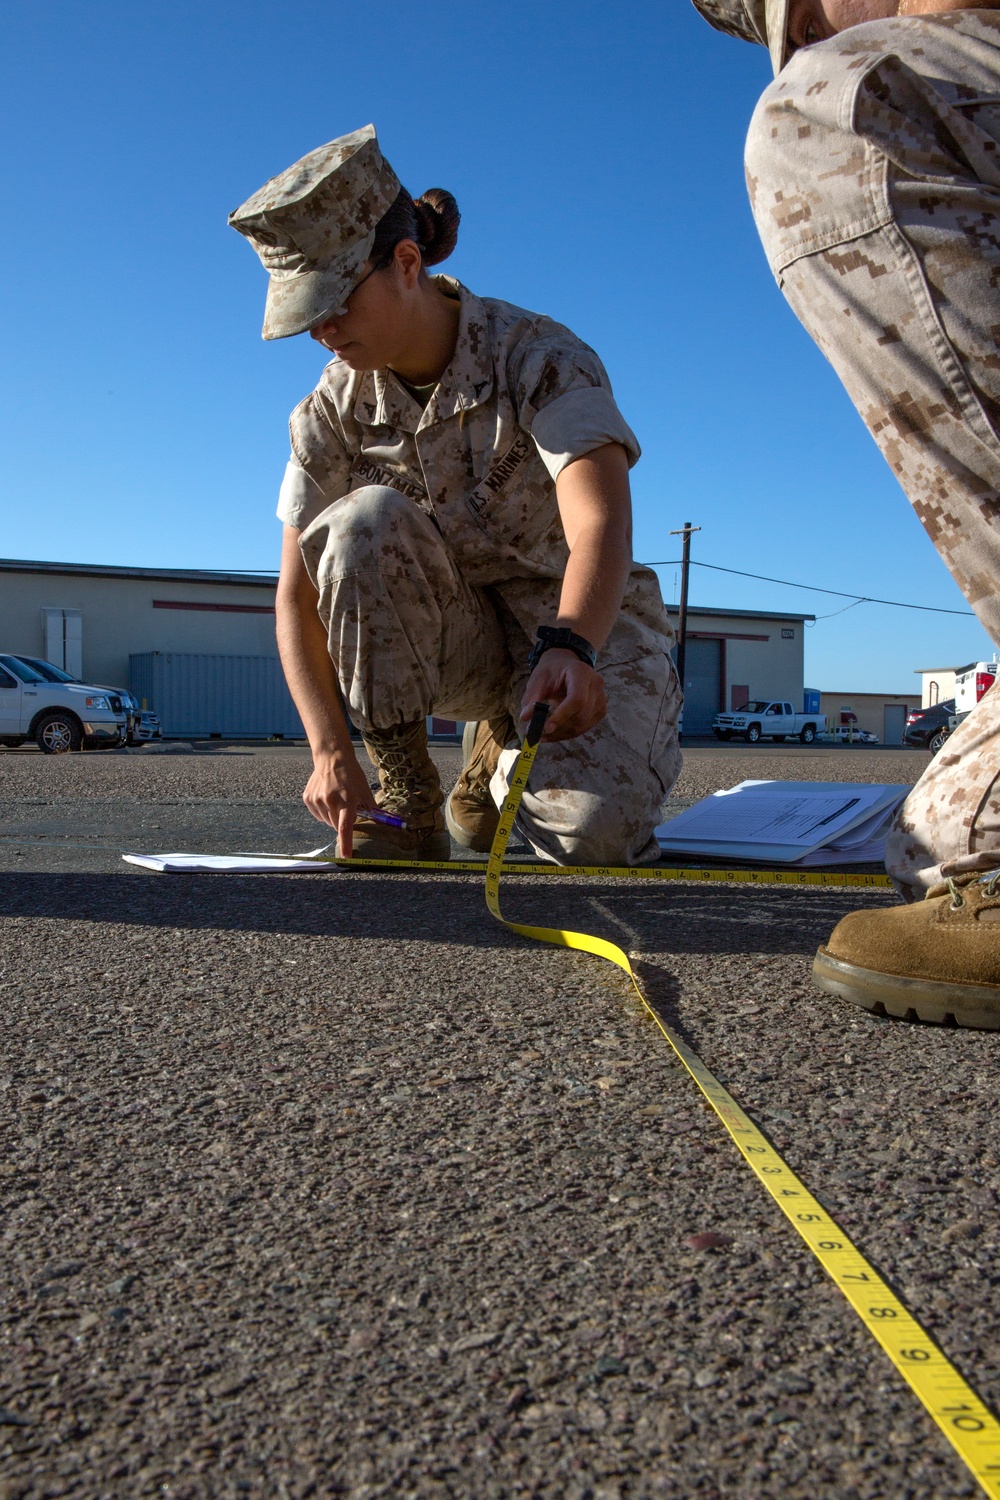 Traffic Collision Investigation Course makes final stop at MCAS Miramar